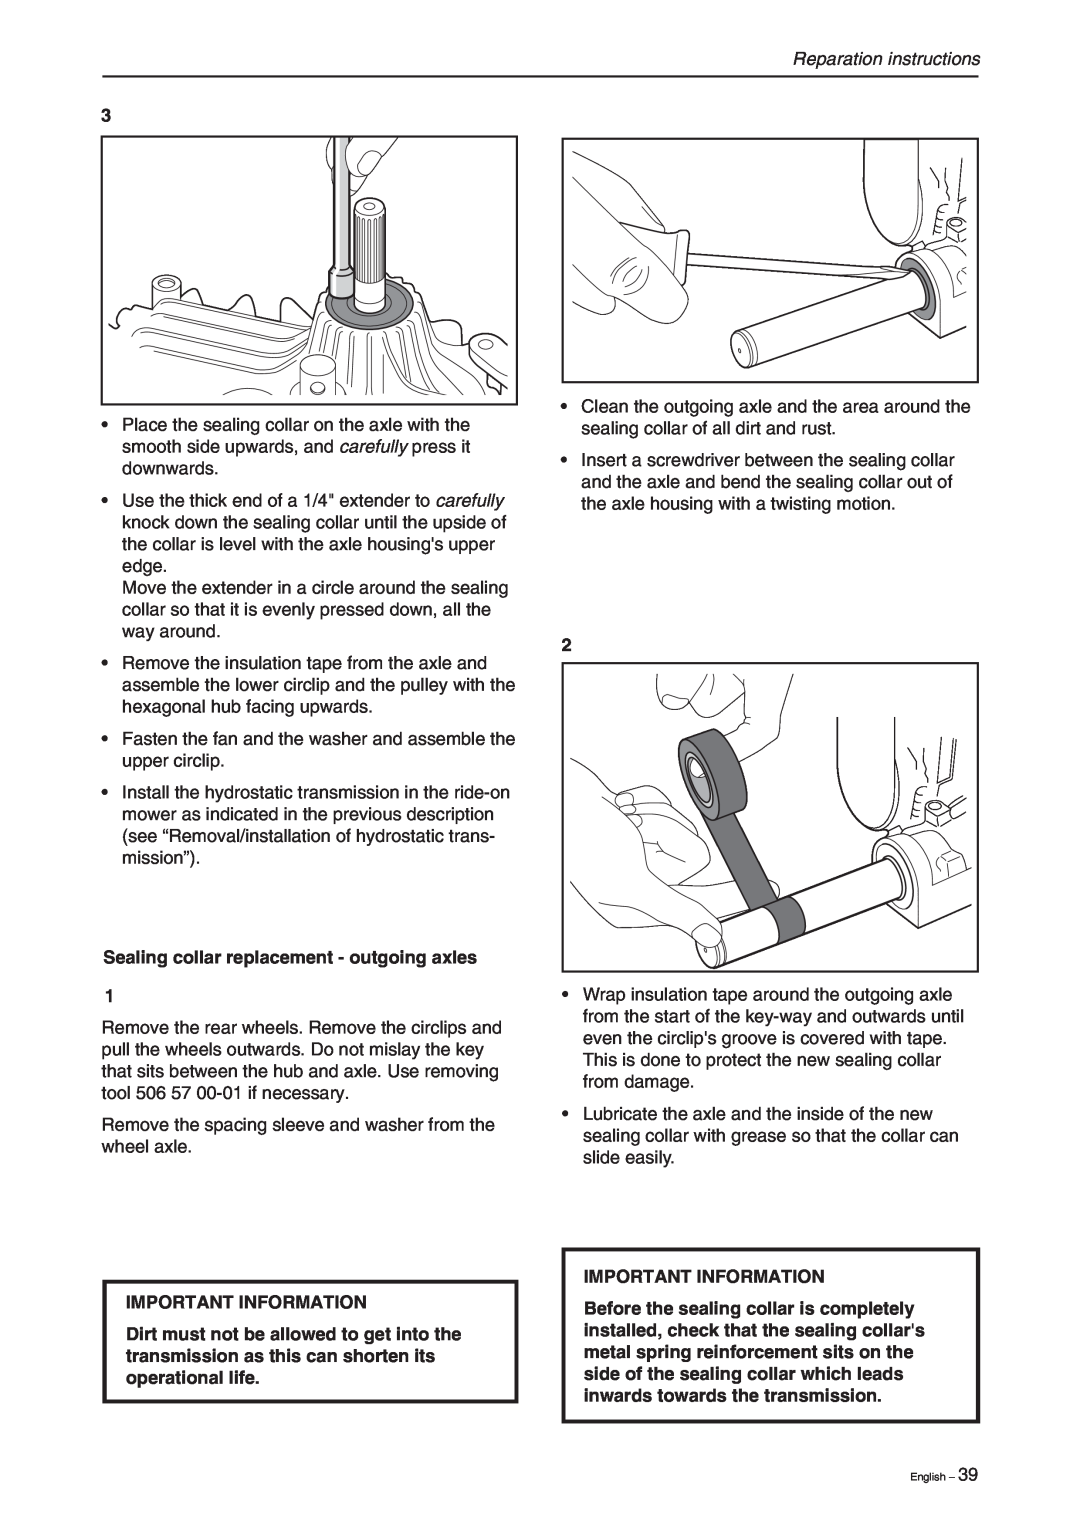 Briggs & Stratton RIDER 11 BIO Sealing collar replacement - outgoing axles, Reparation instructions, Important Information 